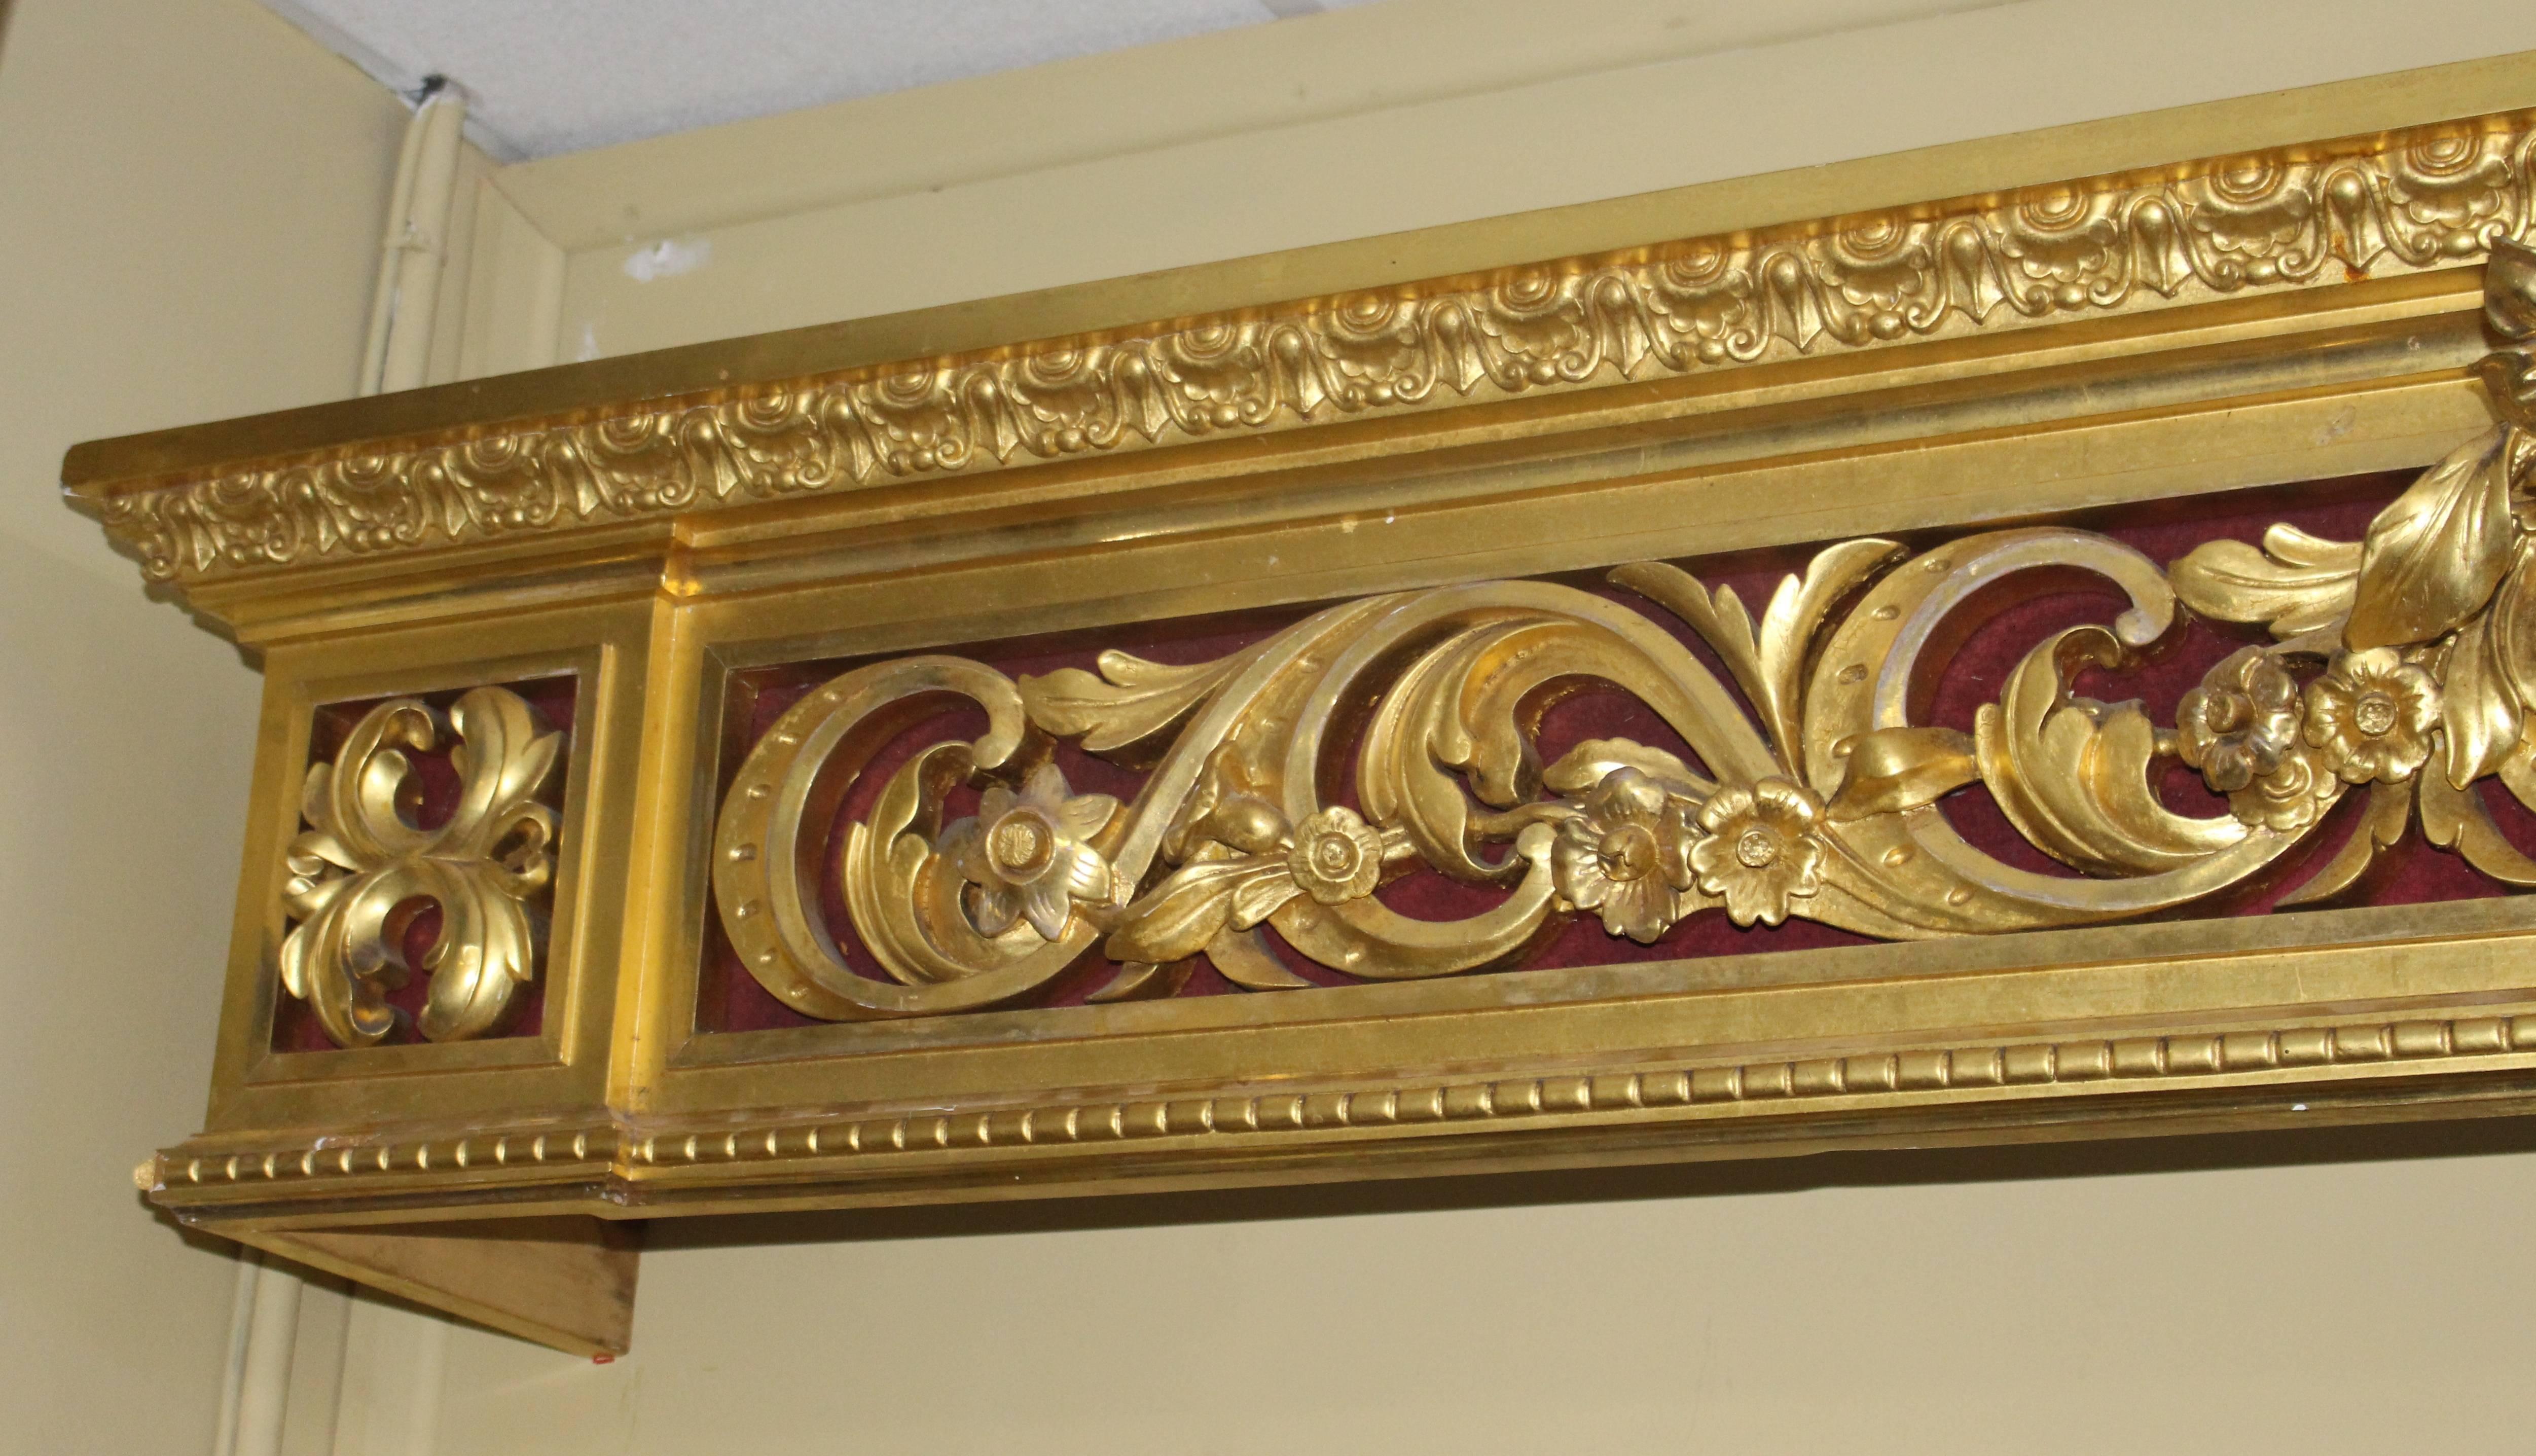 Period	
c.1830, English

Maker	
D.J.McLauchlan, carver & gilder, No.3 Printing House Square, Blackfriars, London

Decoration	
Carved wood composition with true gold leaf gilded finish

Condition	
Offered in very good condition commensurate with age.